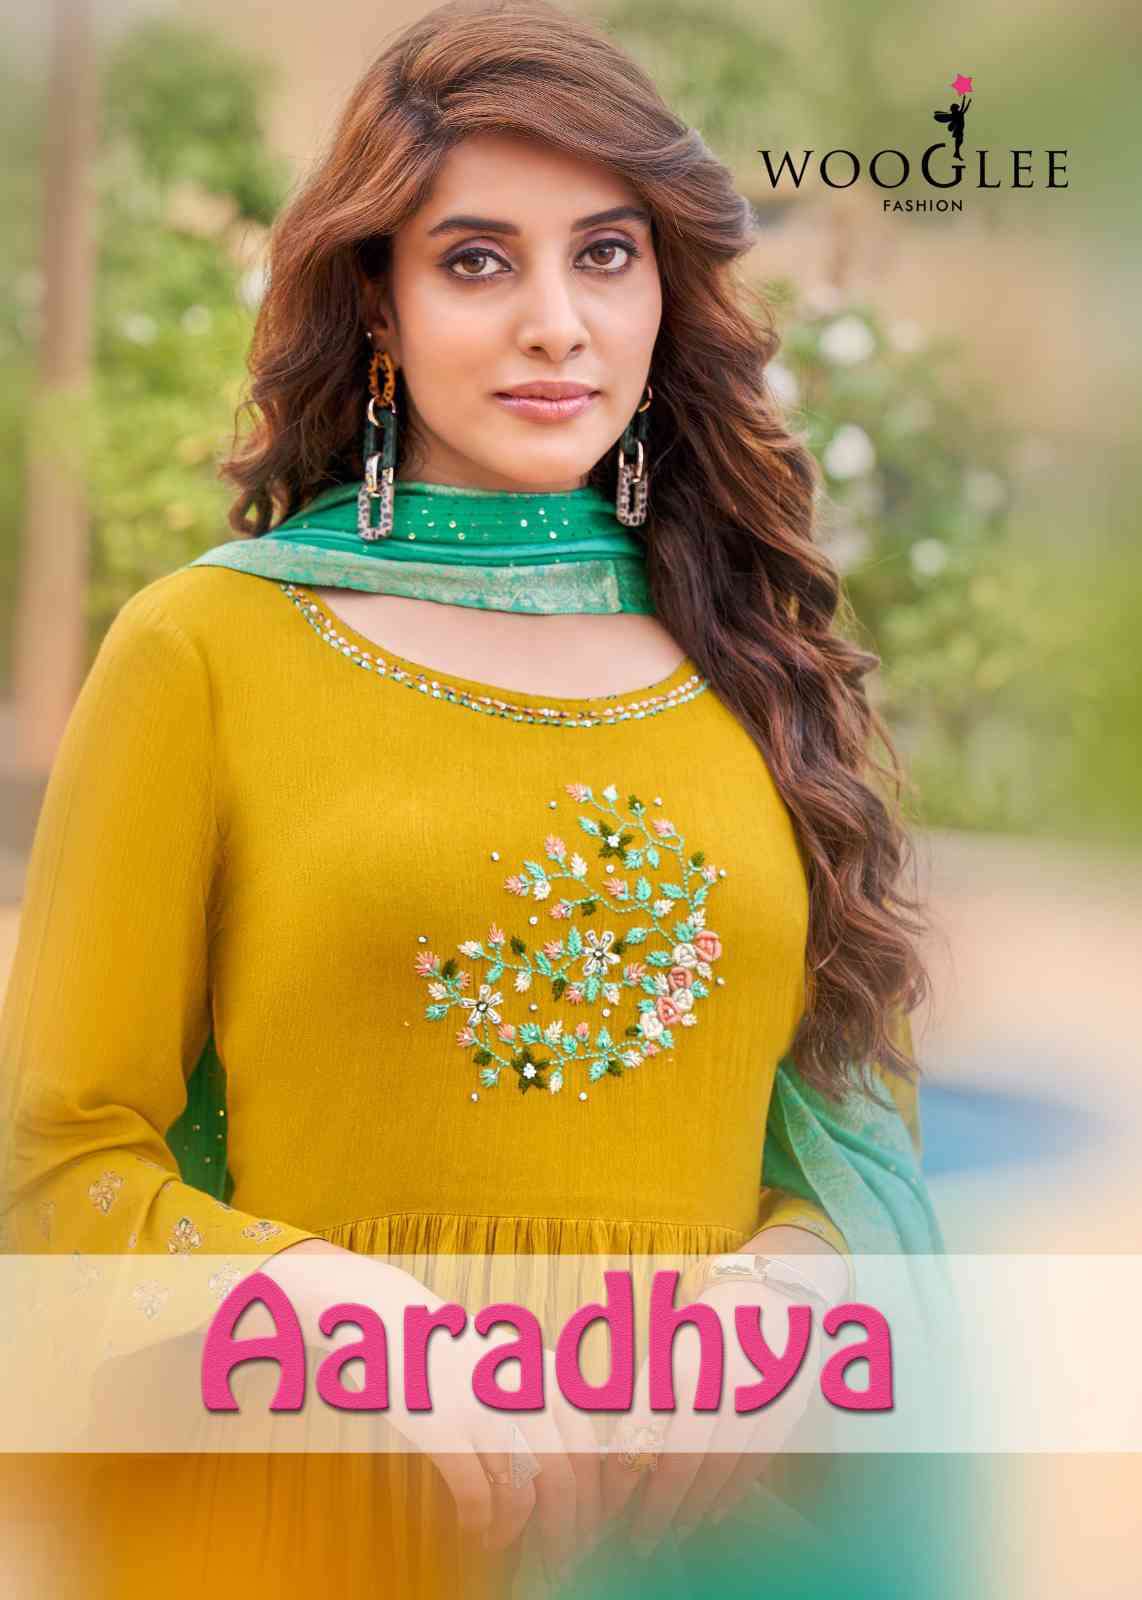 Wooglee Aaradhya Festive Collection Gown Dupatta Set Supplier New Catalog